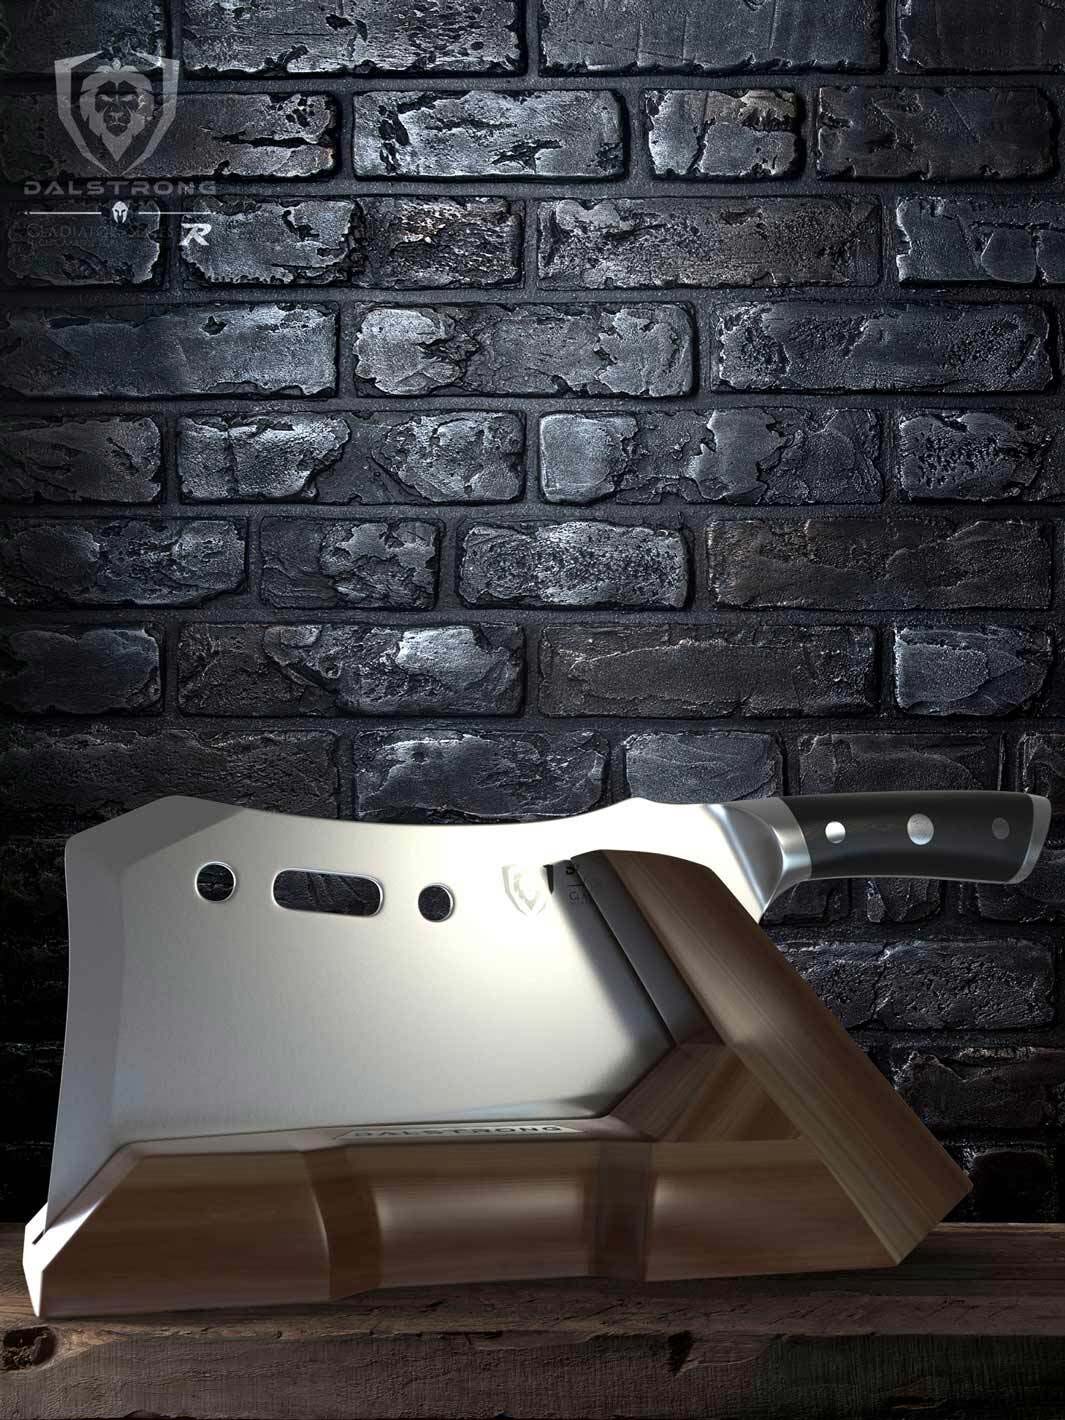 Dalstrong gladiator series 9 inch obliterator cleaver knife with black handle and premium stand on top of a wooden table.